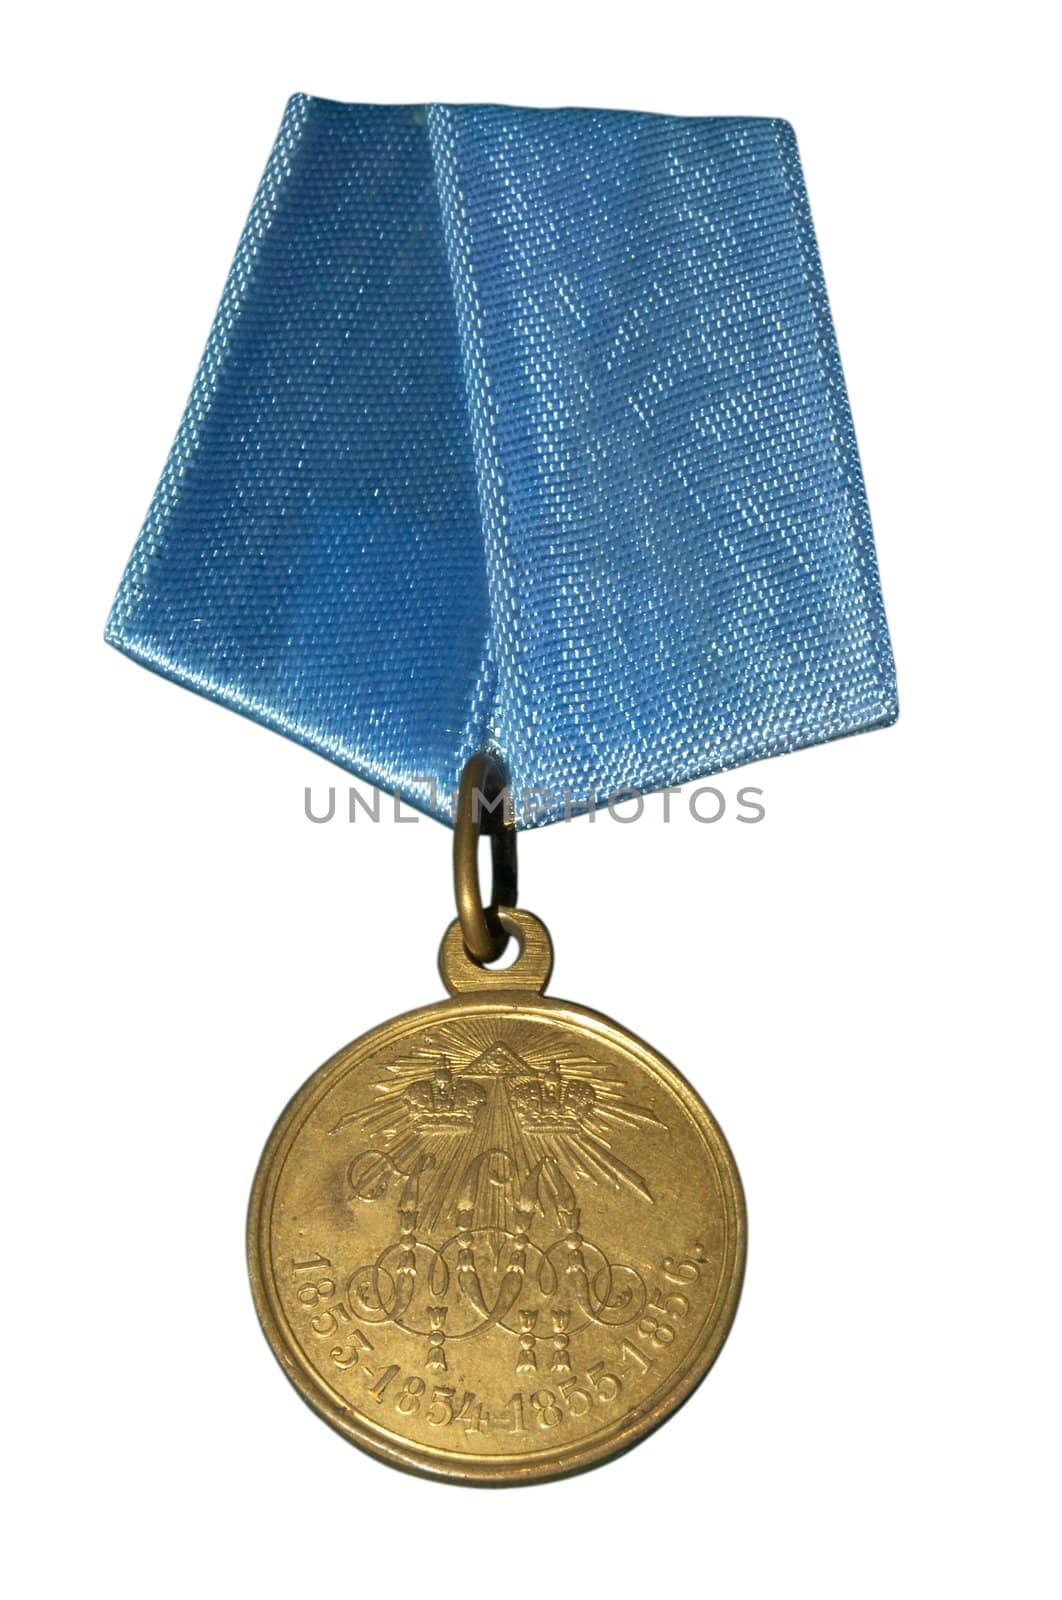 Medal of imperial Russia by eglazov